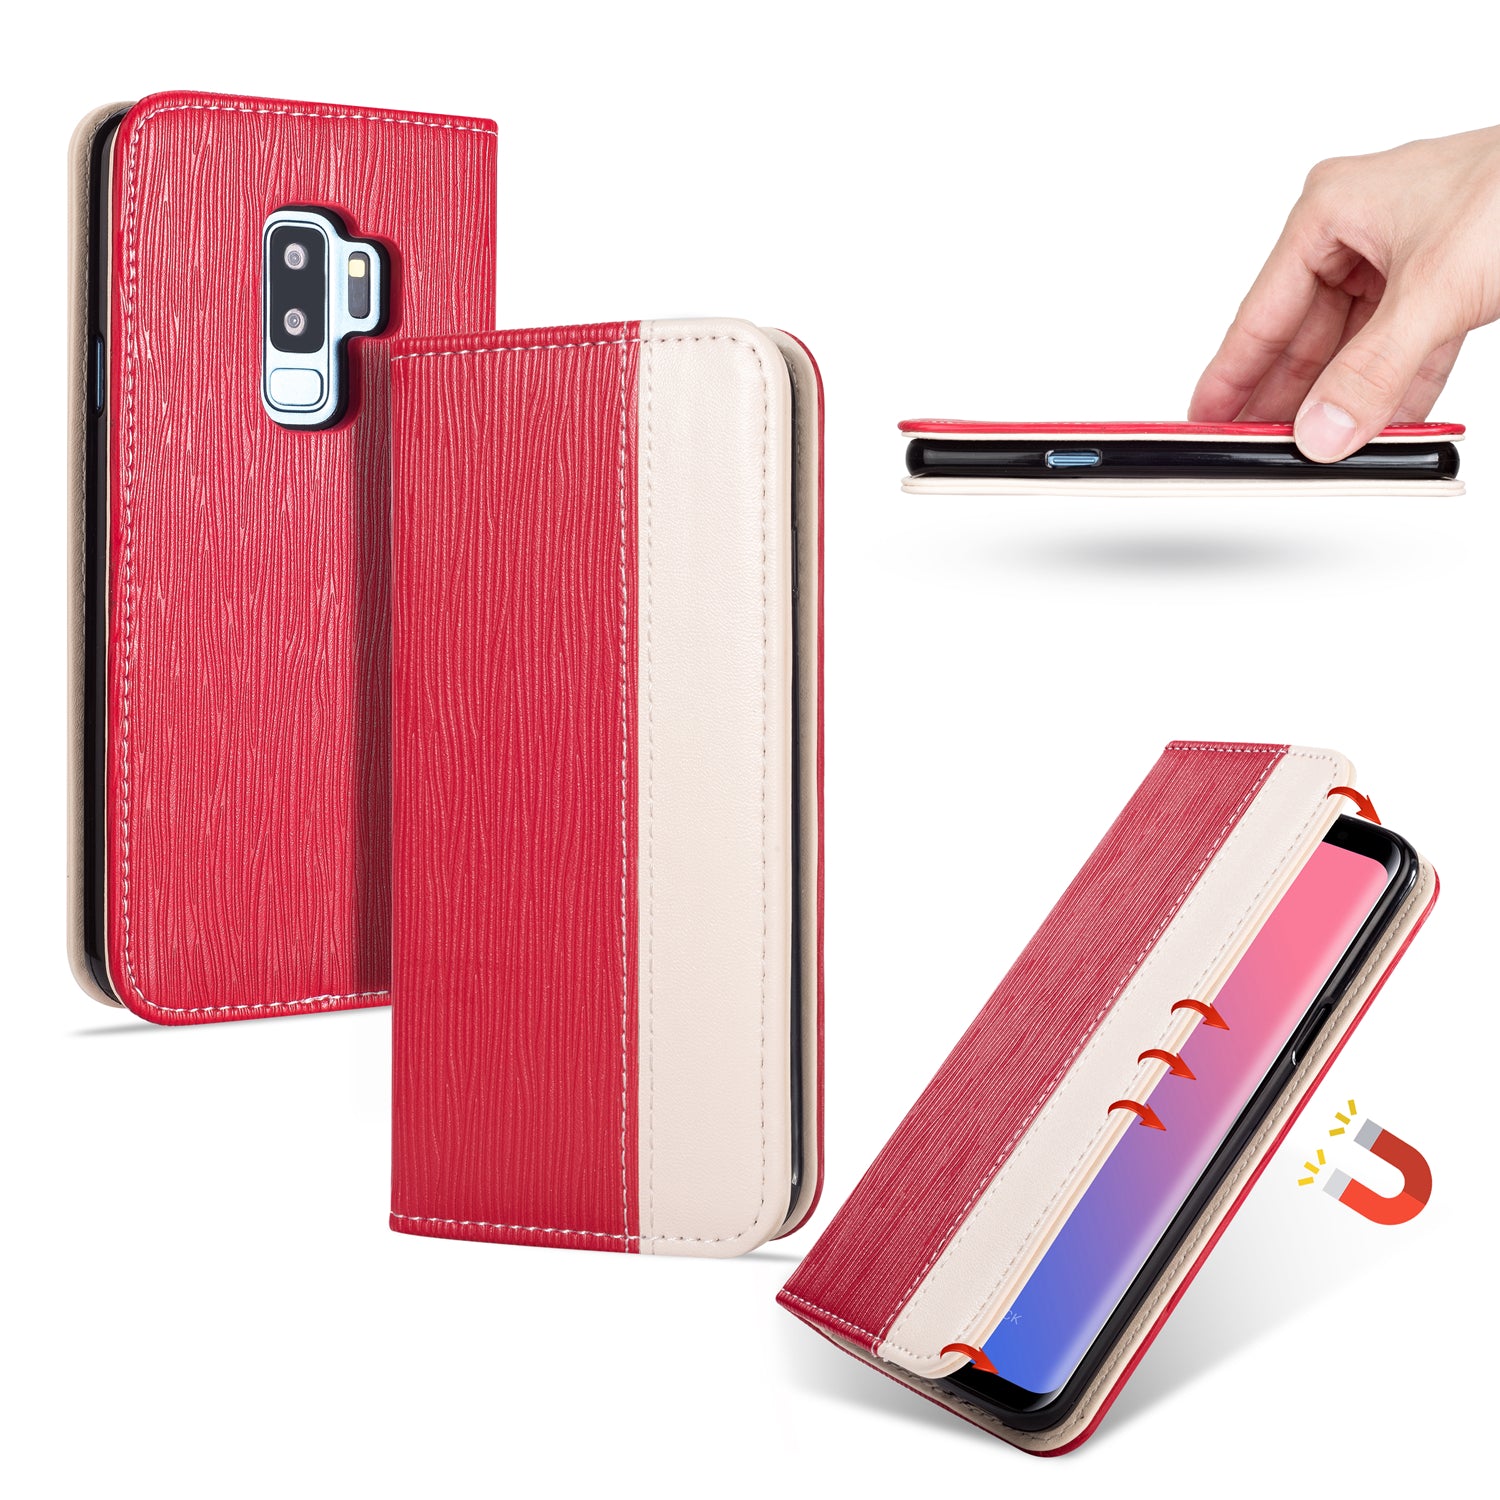 Bakeey Premium Magnetic Flip Card Slot Kickstand Protective Case For Samsung Galaxy S9 Plus